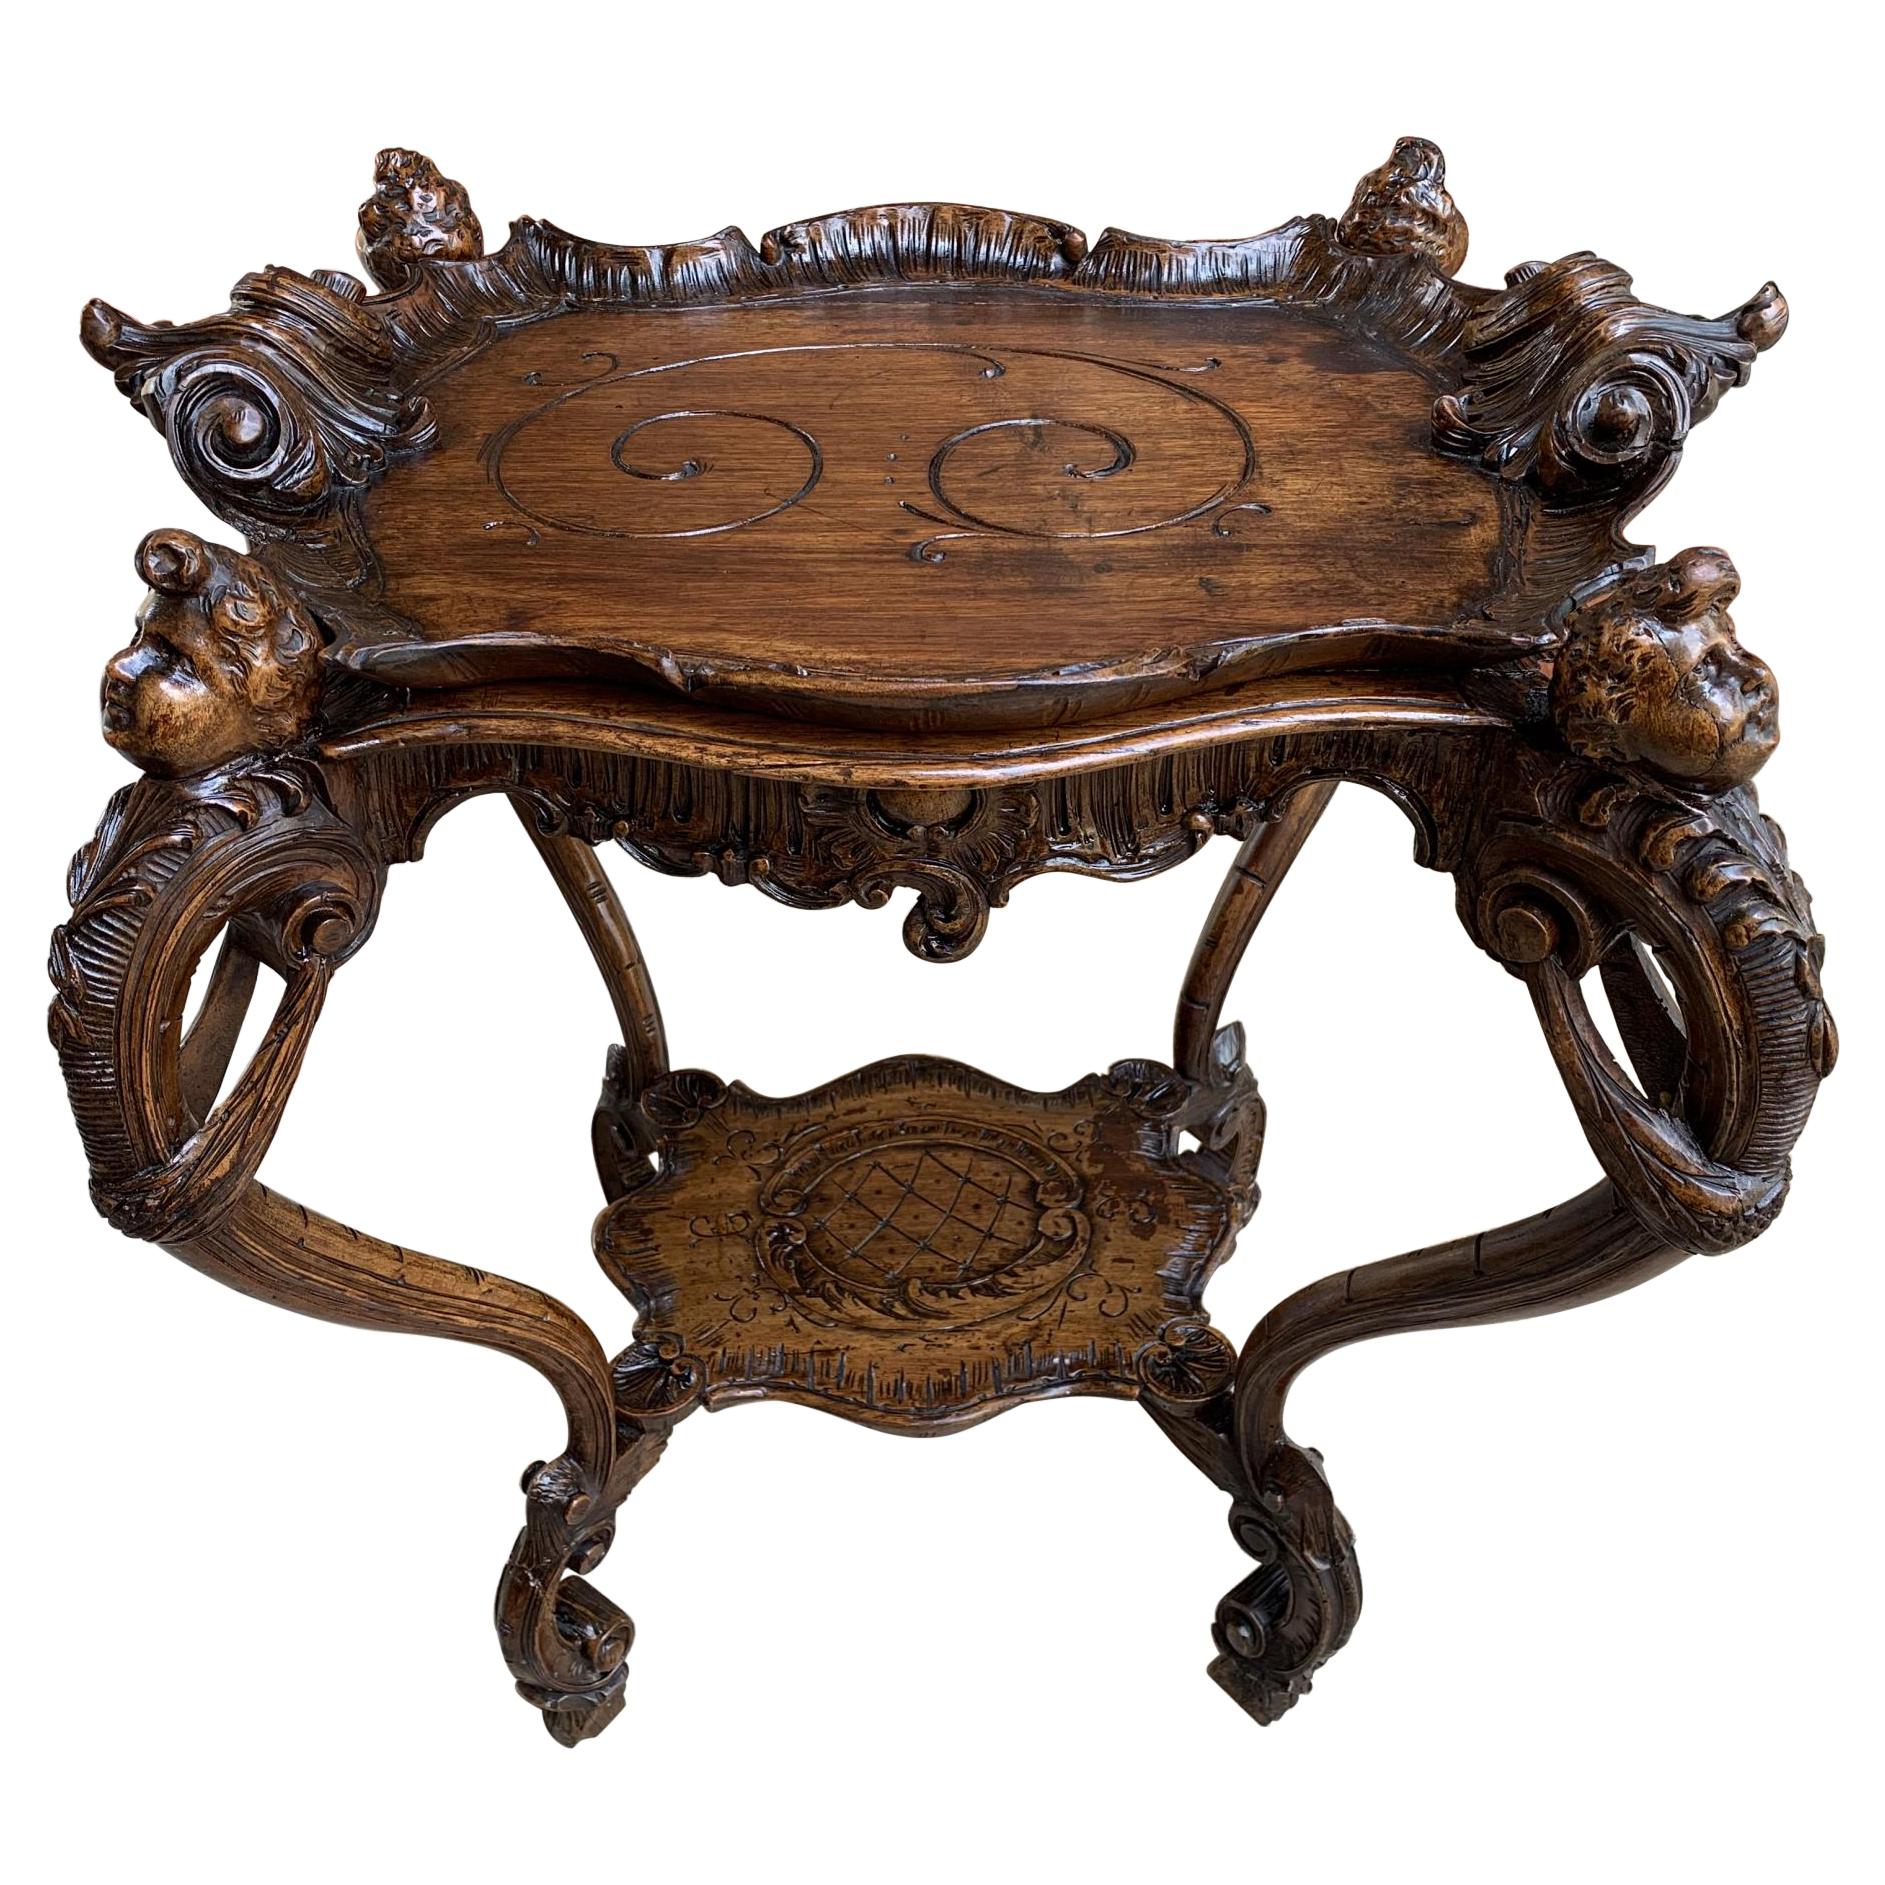 19th century French Carved Oak Sofa Dessert Table Serving Tray Louis XV Cherub For Sale